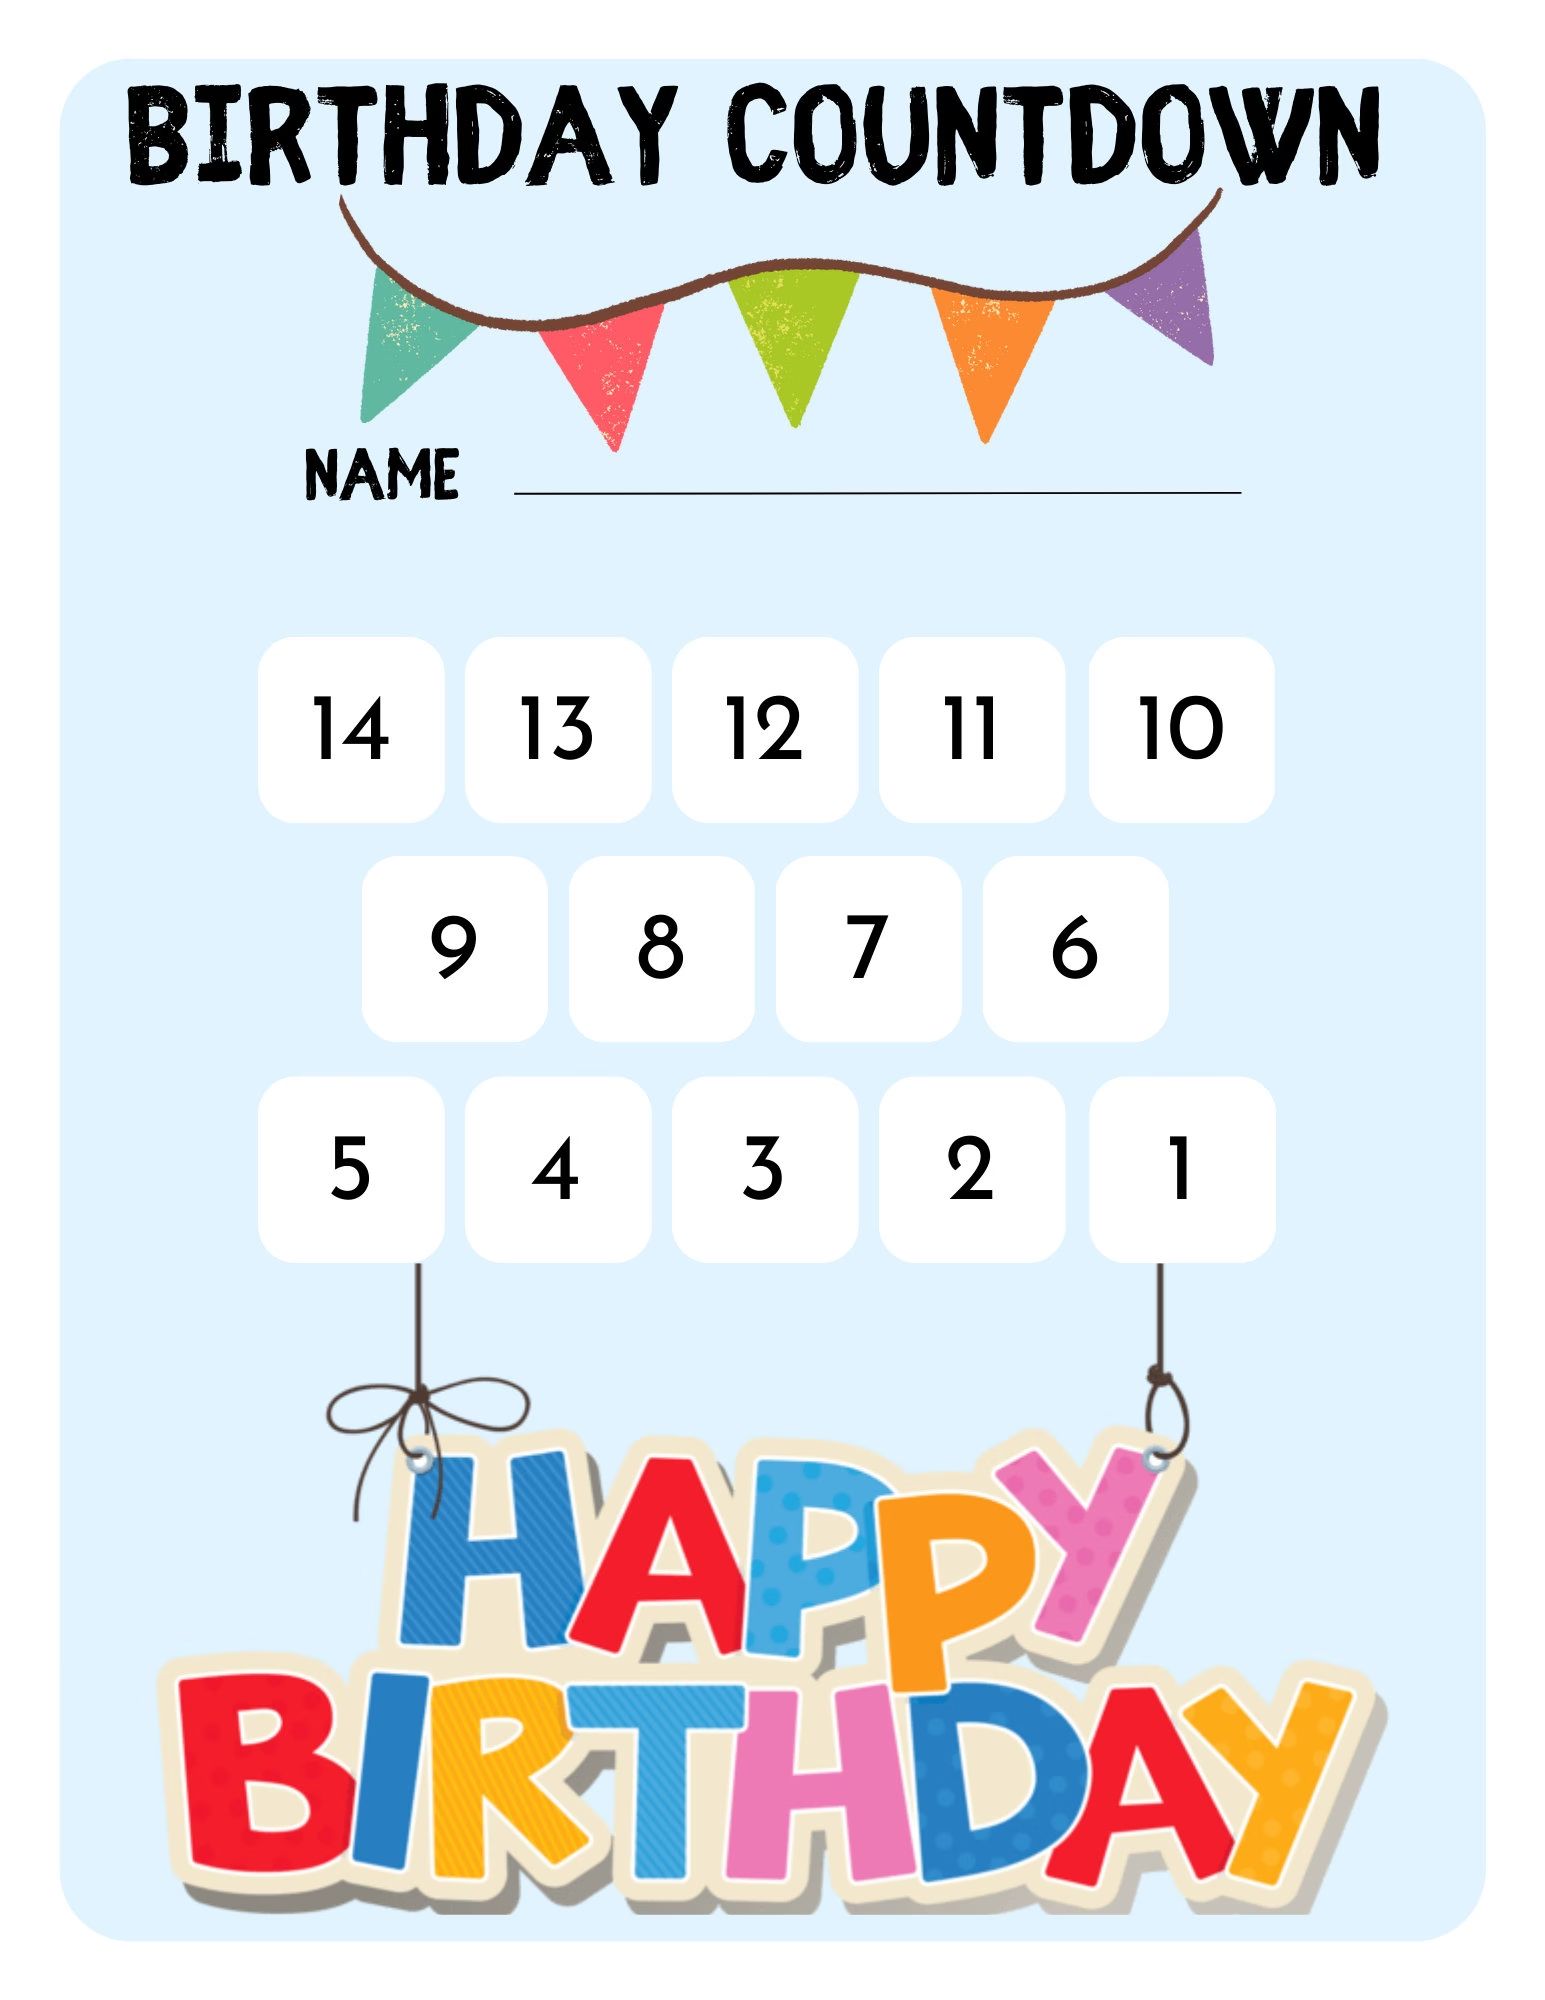 Creative Birthday Countdown Ideas for Adults